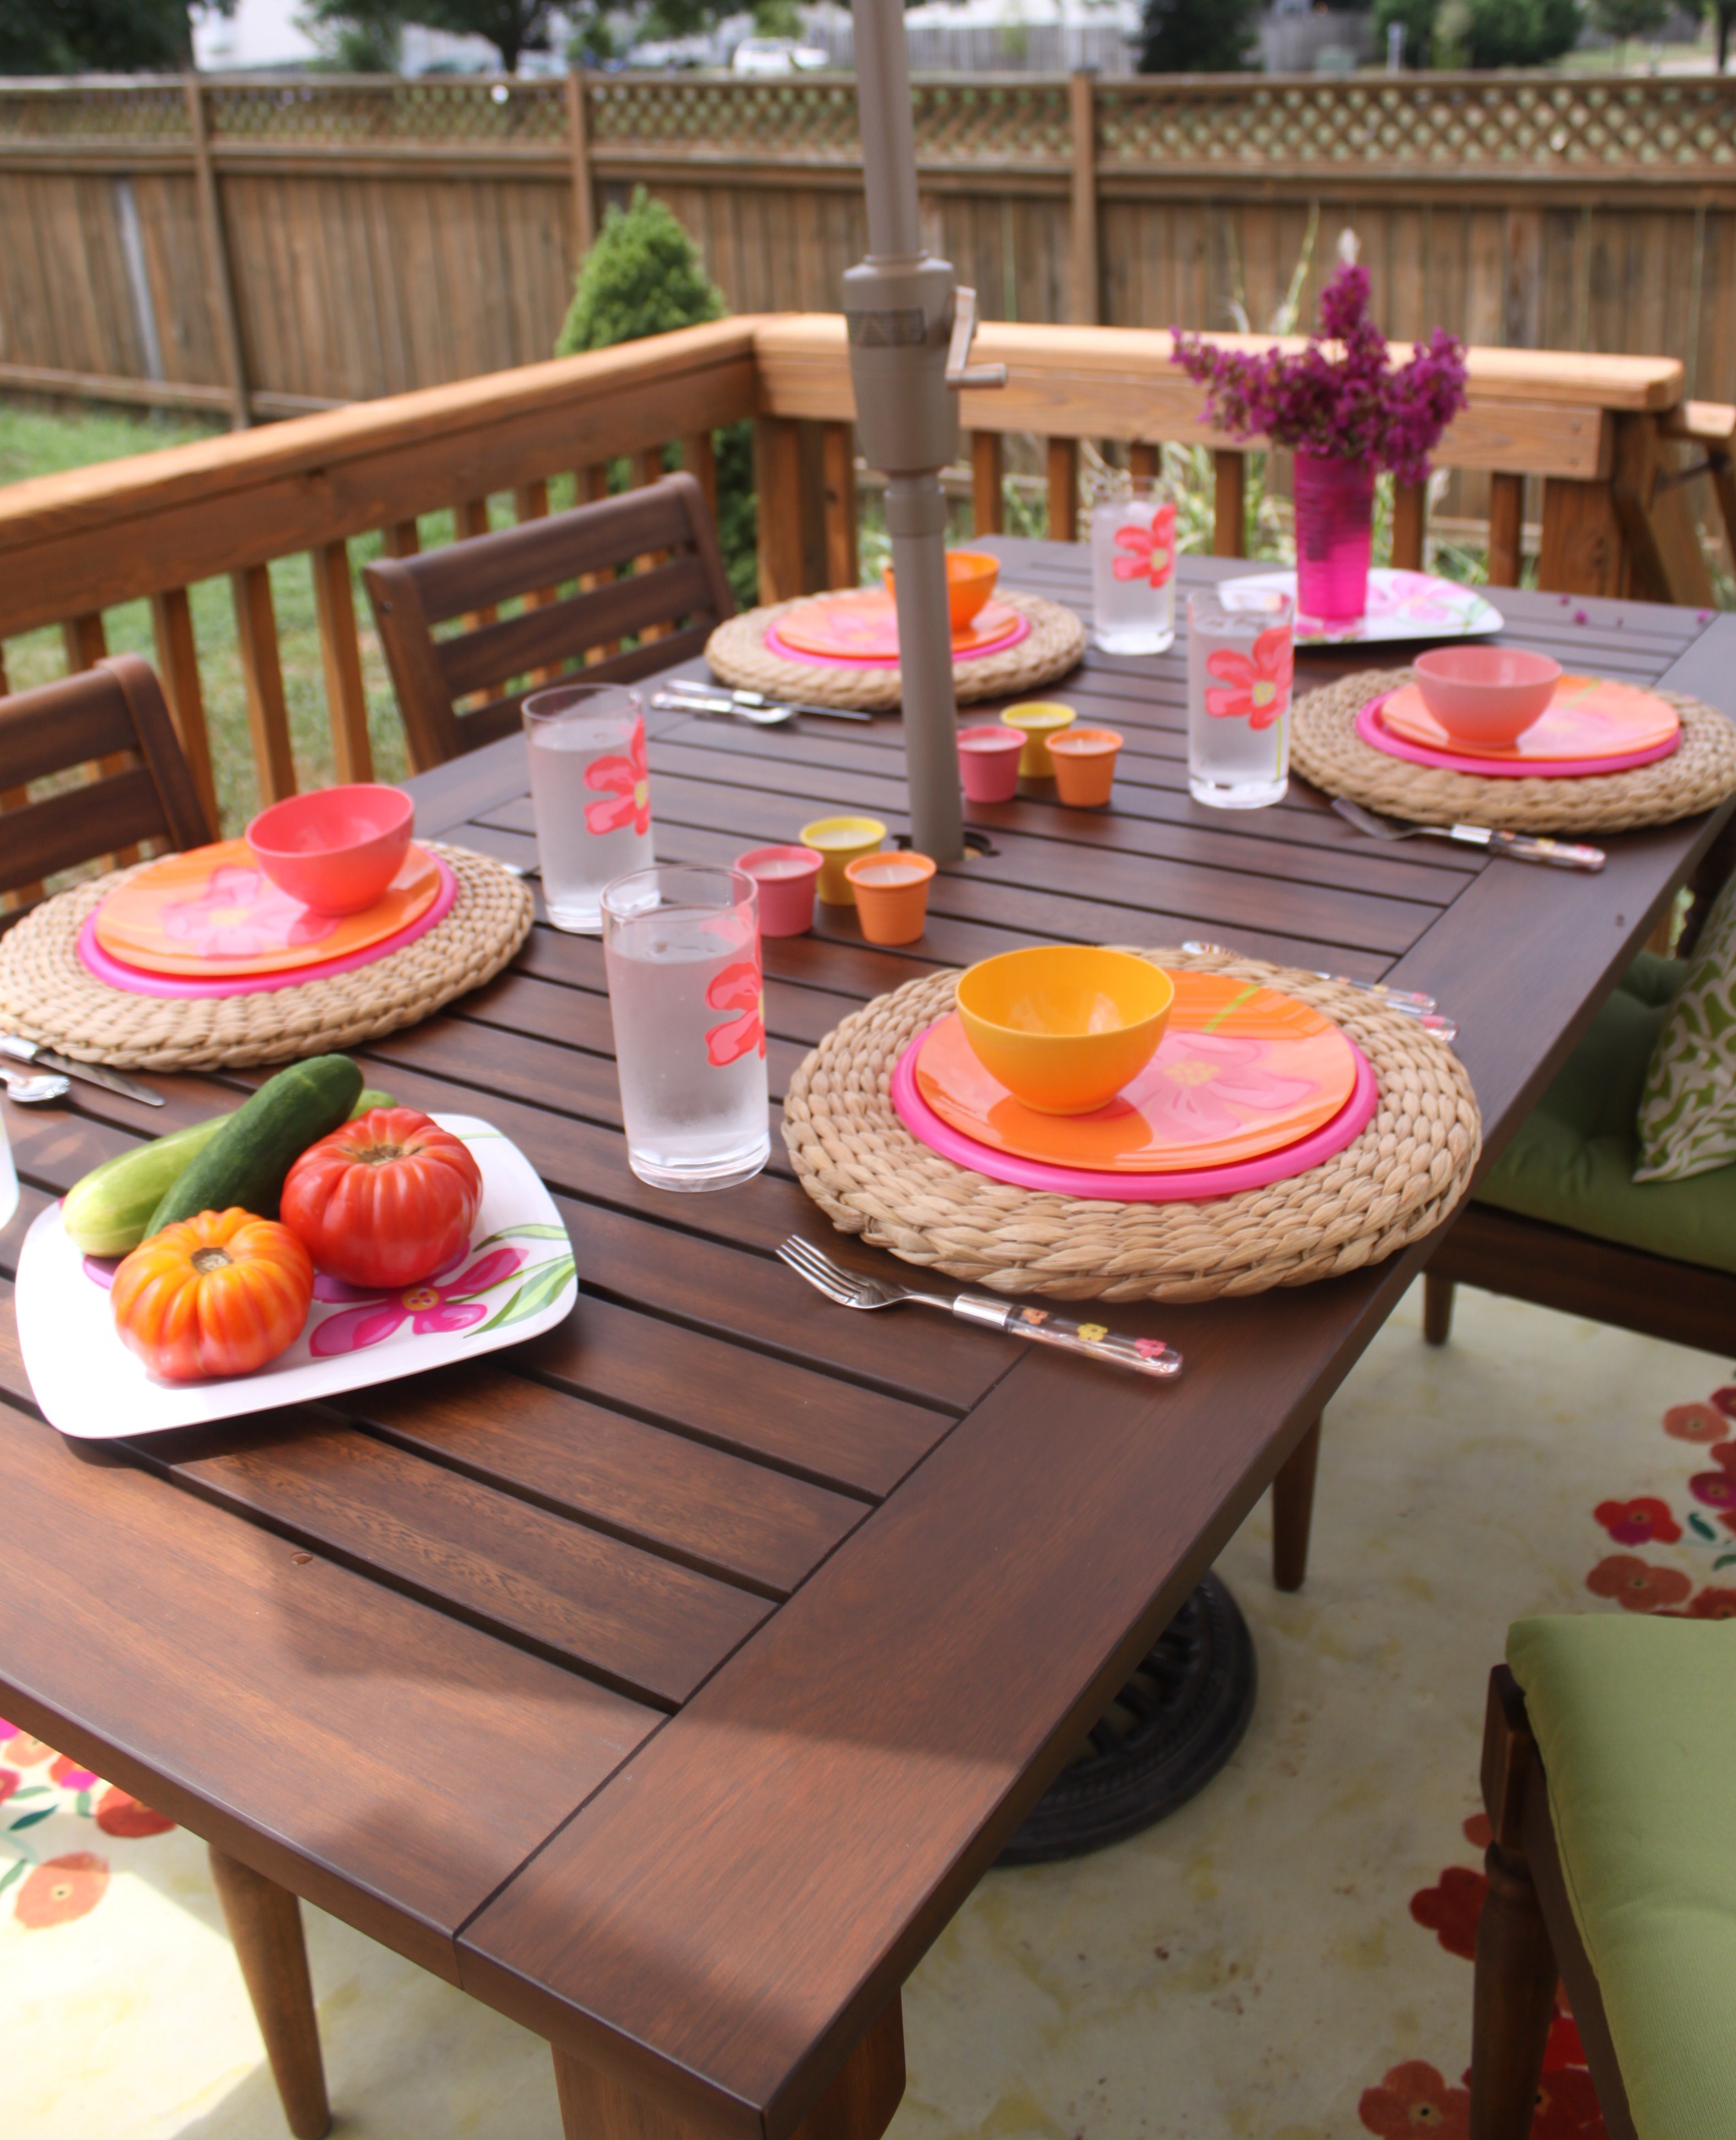 Stay healthy while dining outdoors - Baylor College of Medicine Blog ...